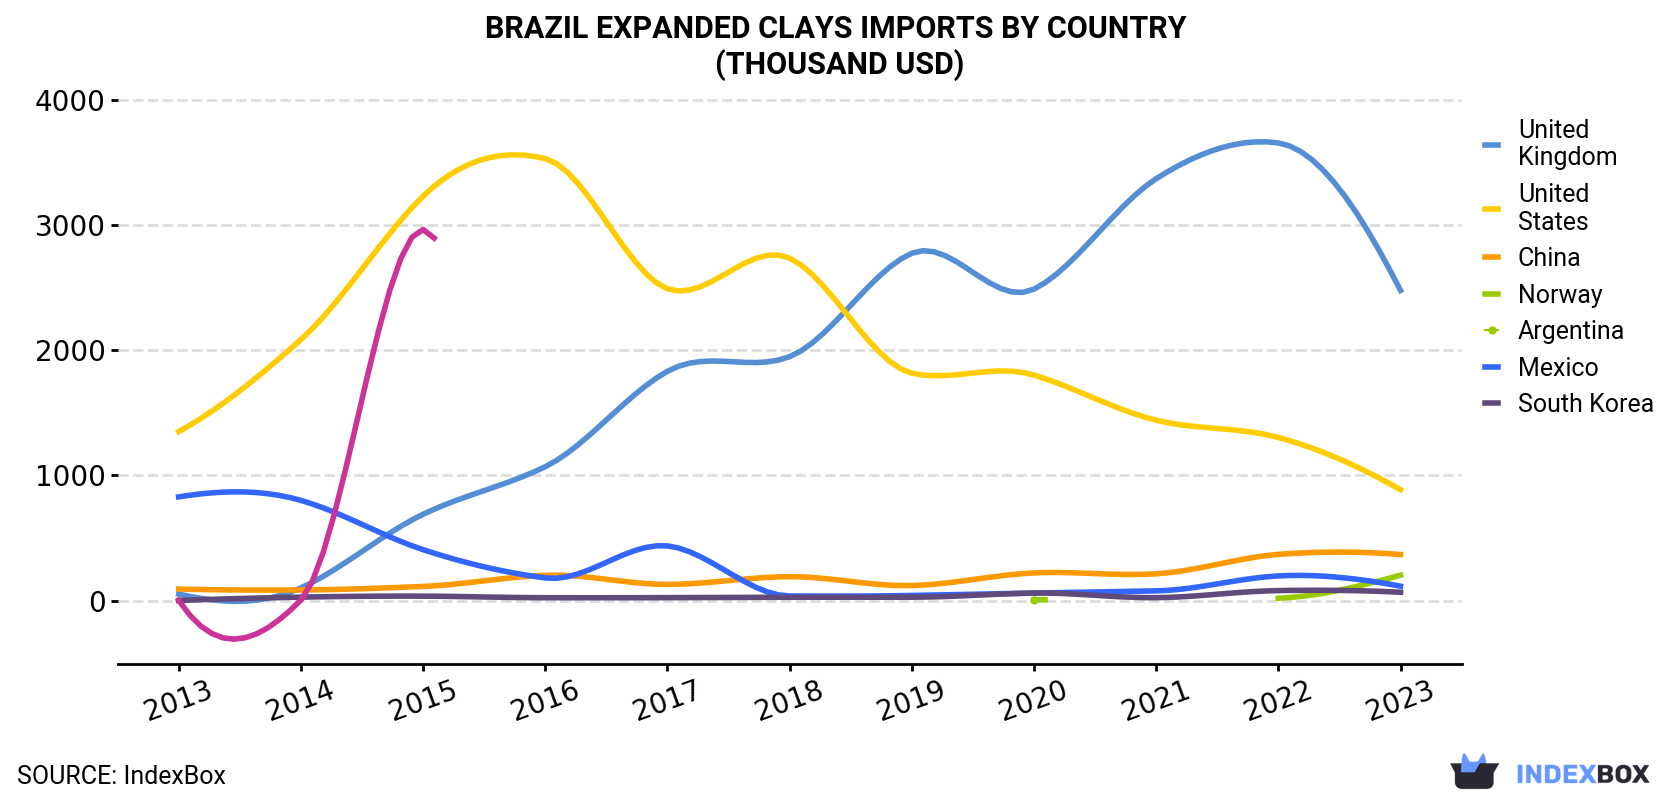 Brazil Expanded Clays Imports By Country (Thousand USD)